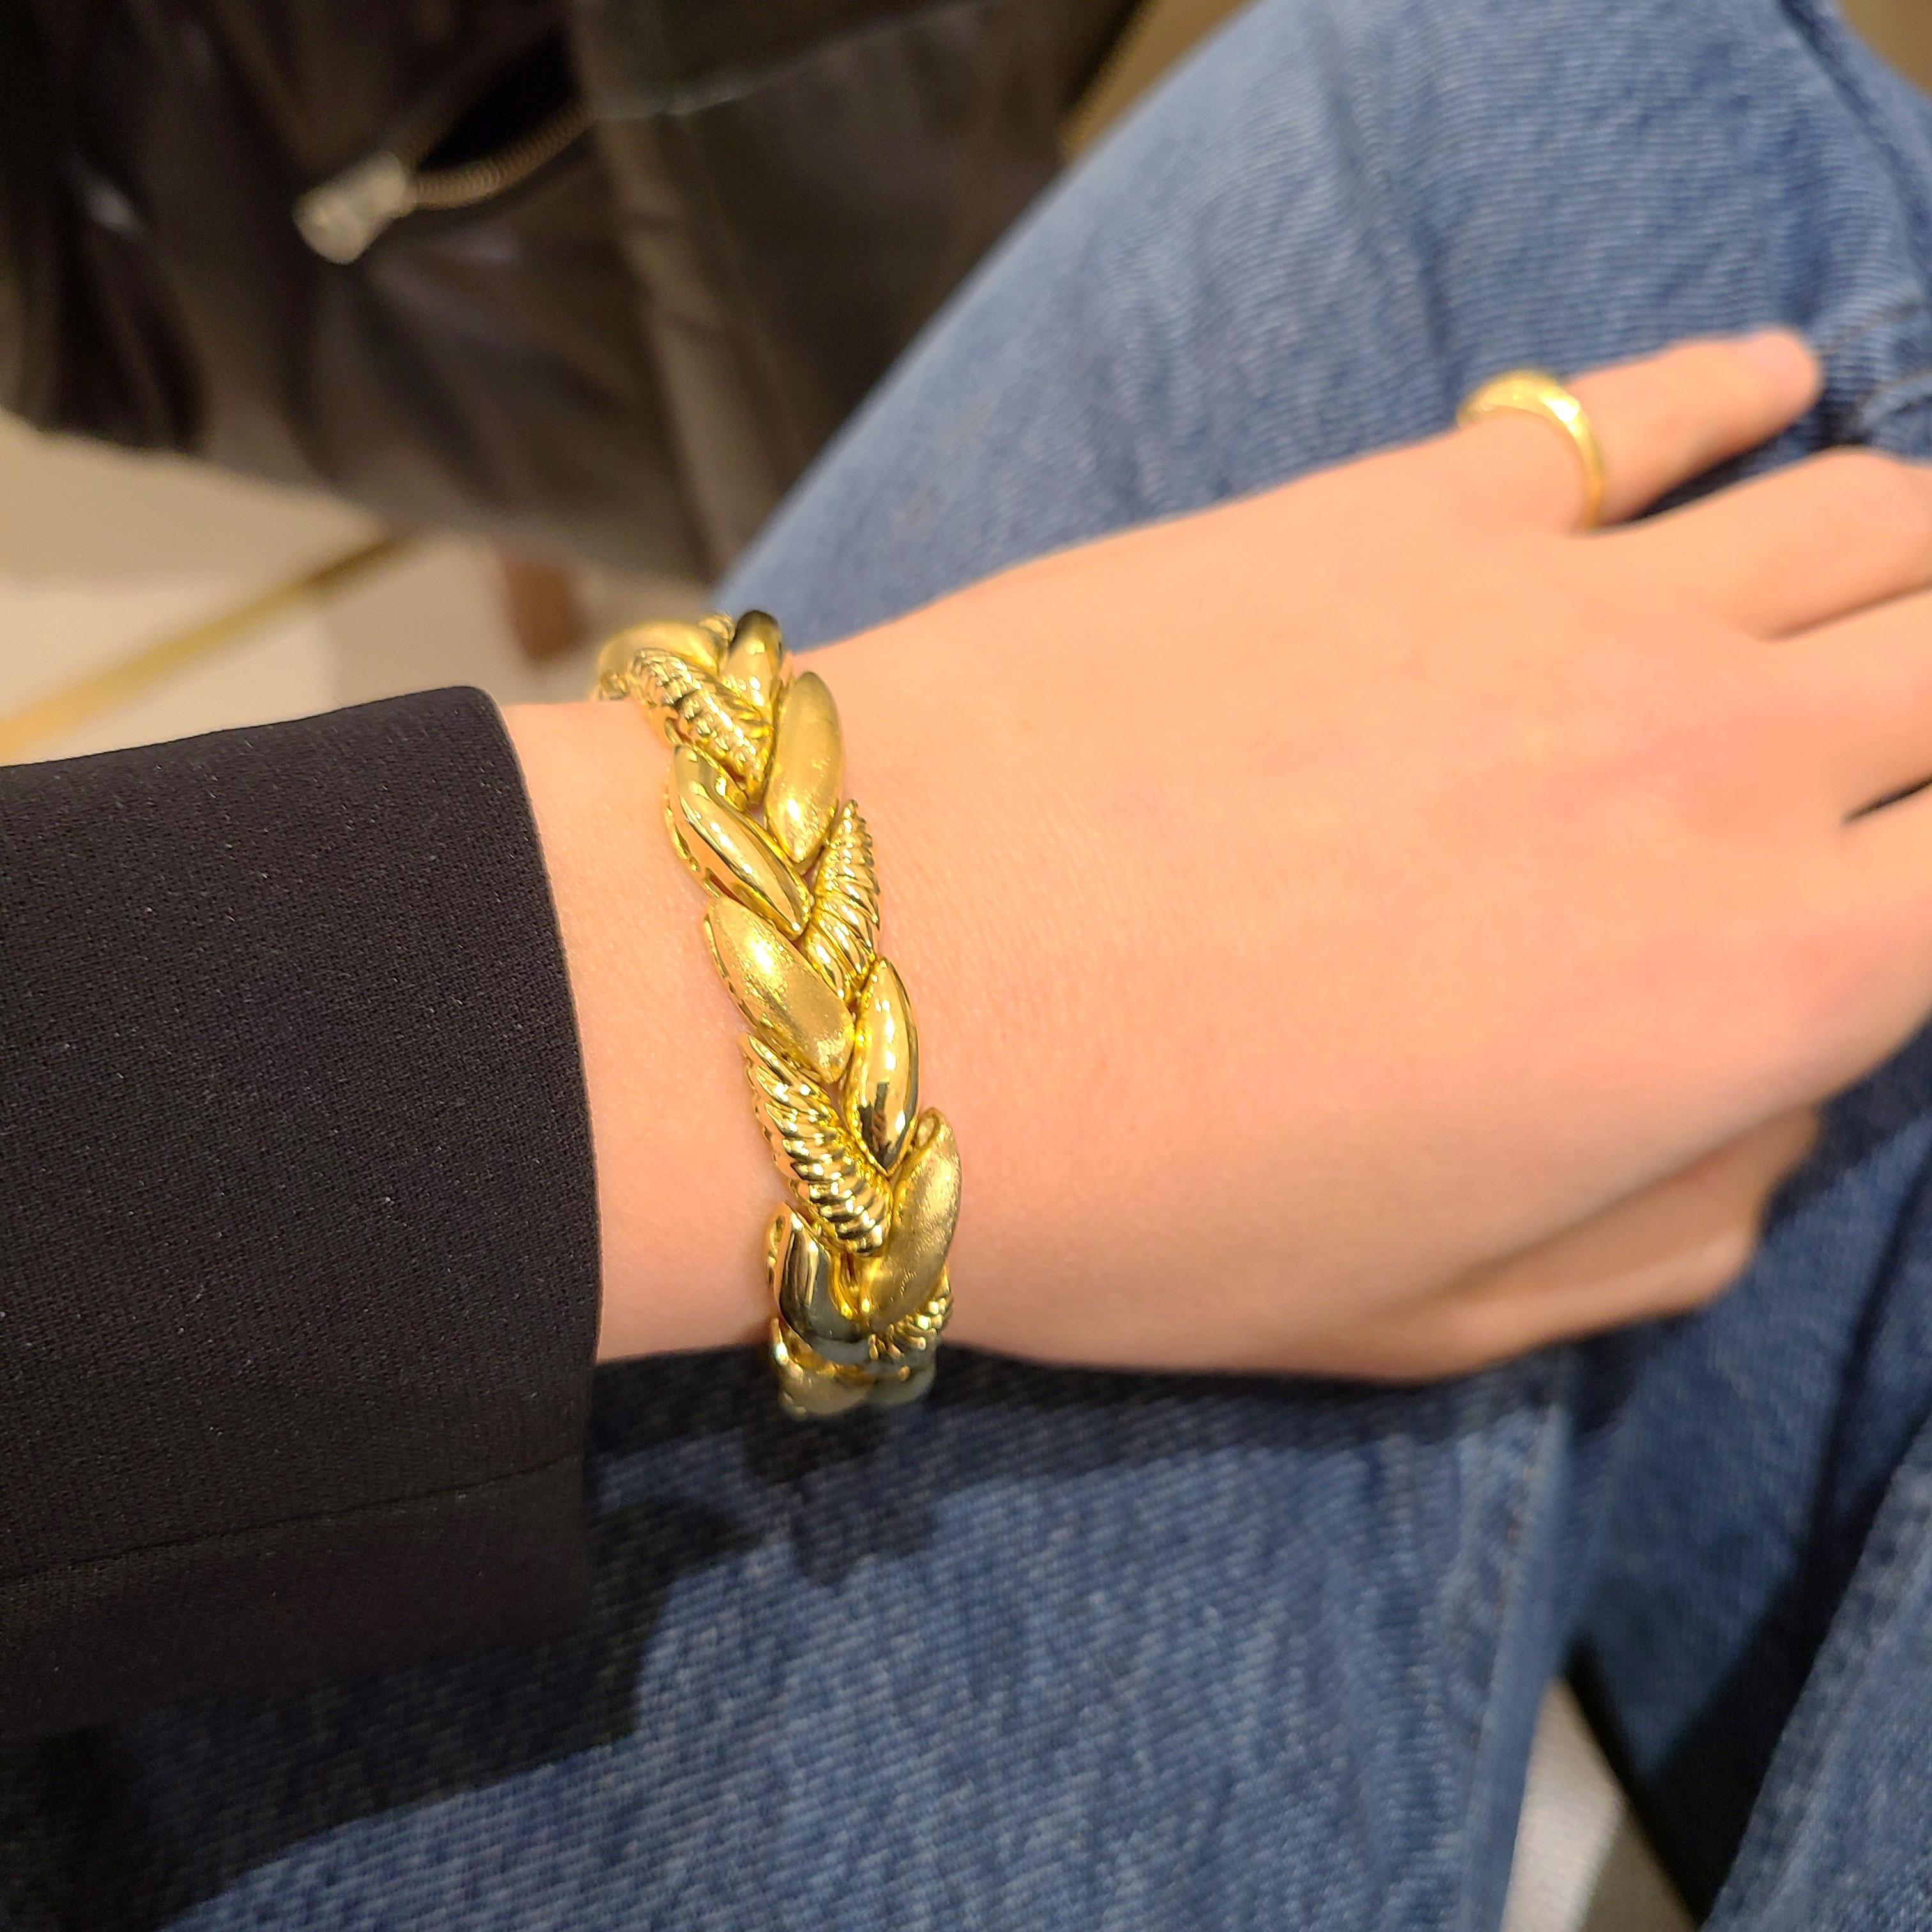 Beautiful 18kt yellow gold bracelet designed by Roberto Coin of Italy. The bracelet is designed as a braid with 3 different finishes, shiny,matte and ribbed. Together the contrast works exquisitely in this classic and timeless  7.25